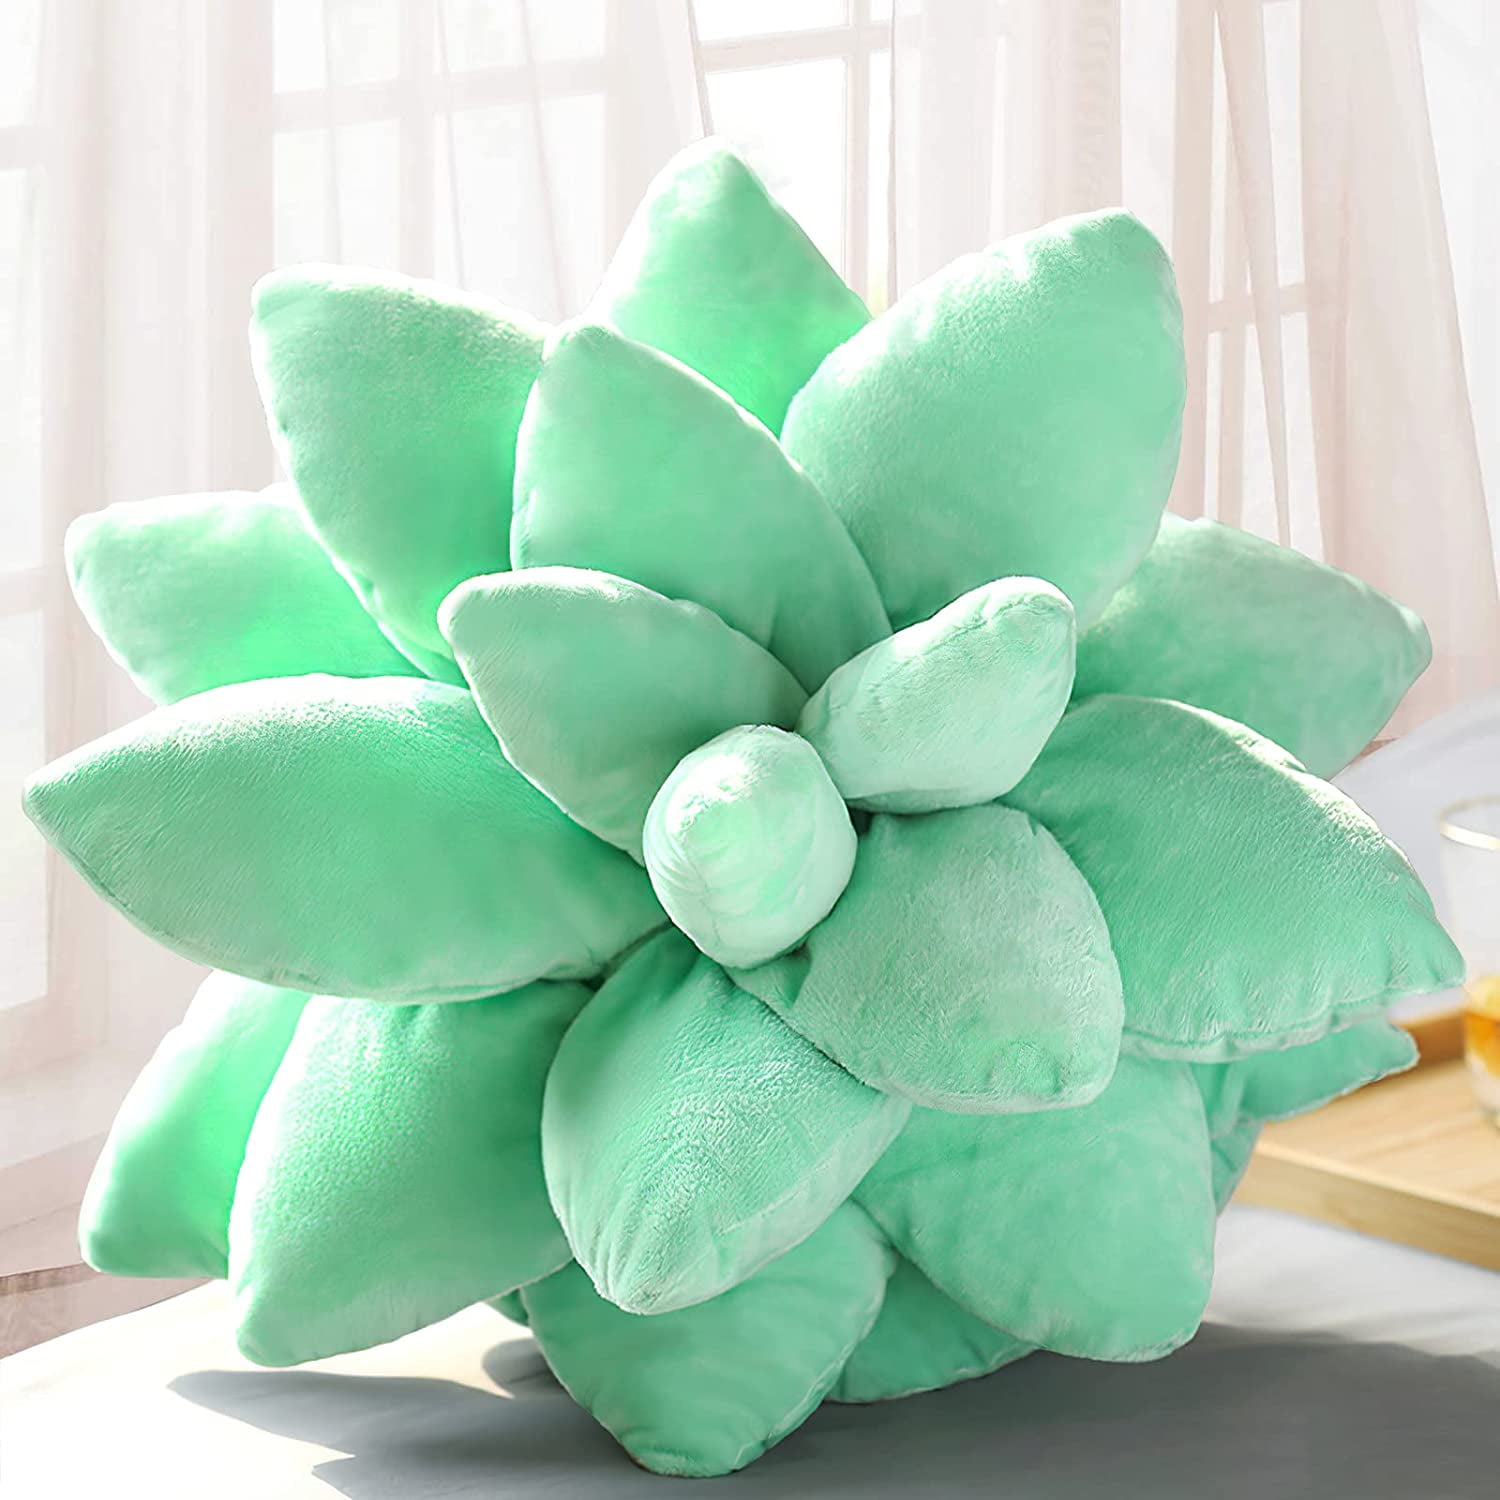 How to Make a Giant Succulent 3D Pillow (With Pattern) - FeltMagnet